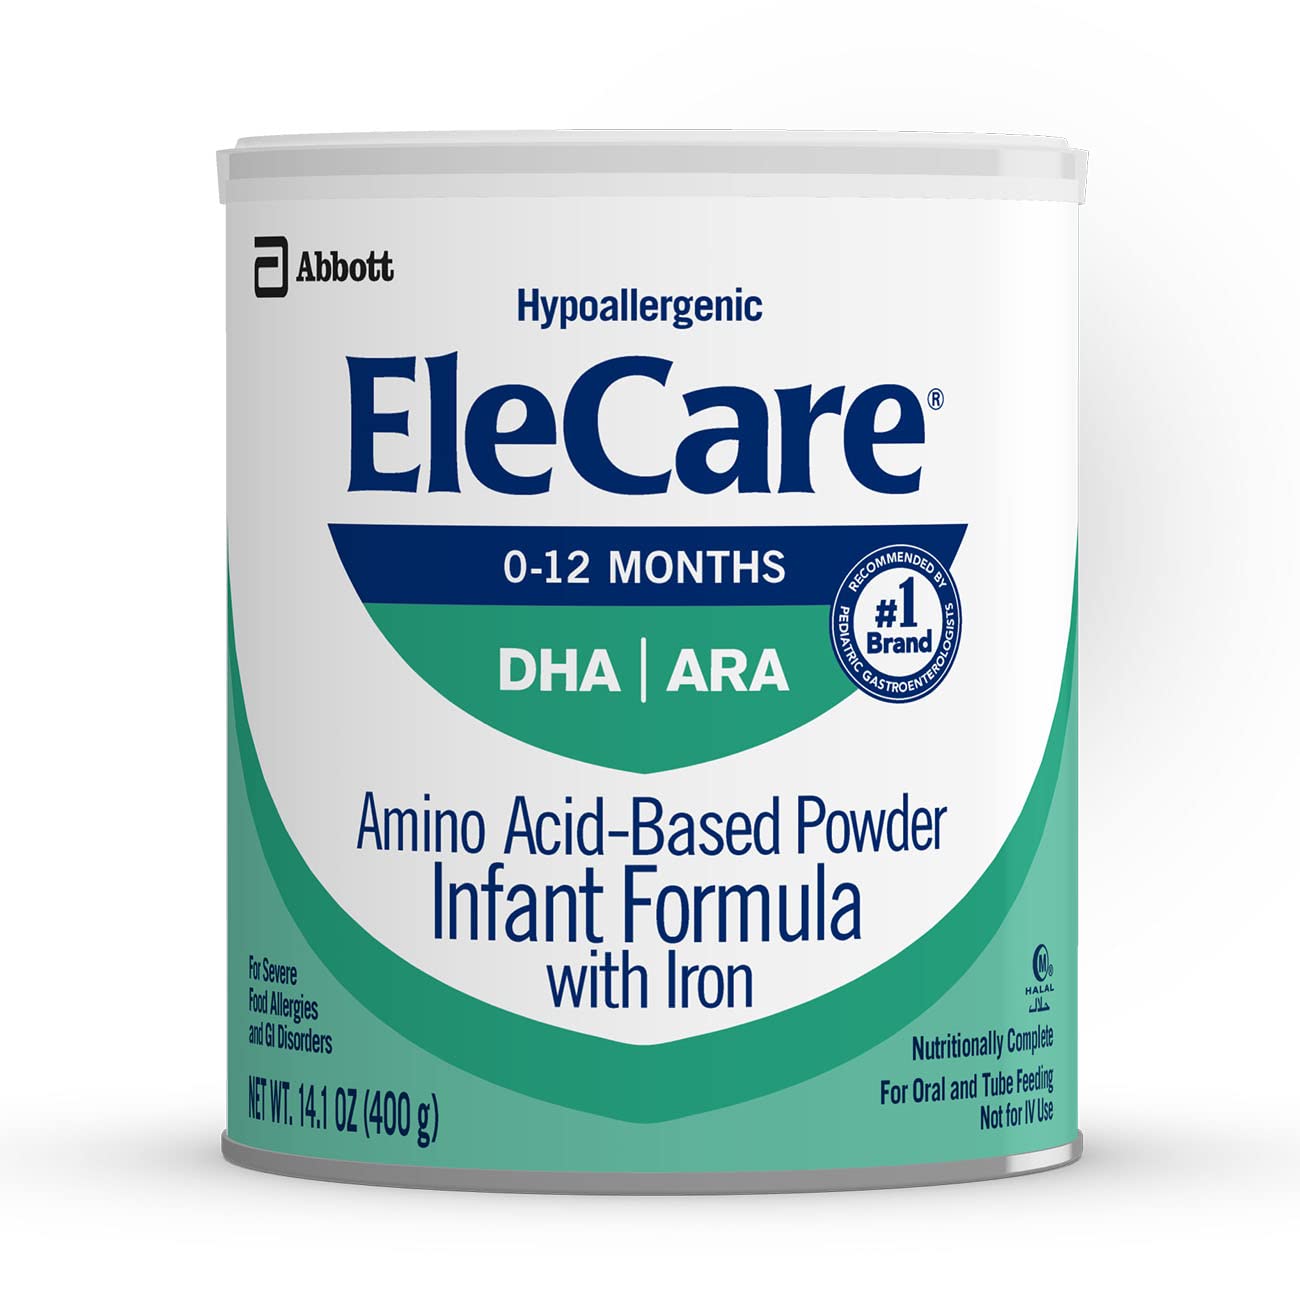 EleCare® Hypoallergenic Infant Formula, Complete Nutrition For Food Allergies, Amino Acid-based Baby Formula Powder, 14.1-oz Can